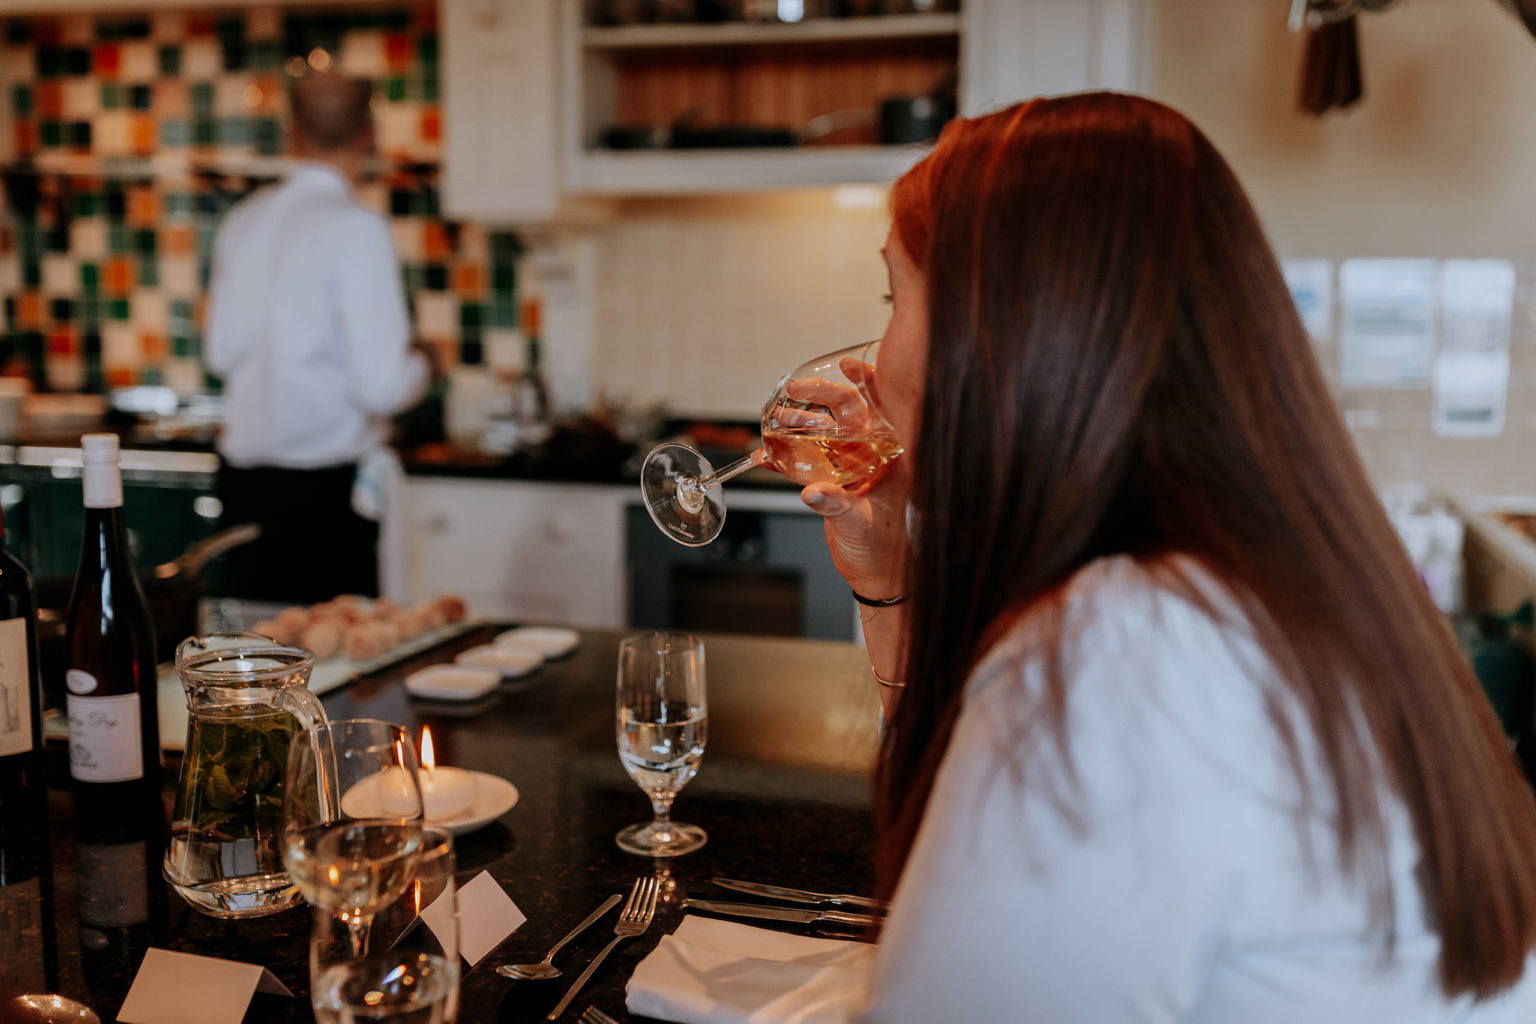 A woman drinking from a glass of wine during a Chef's Table experience at Swinton cookery School